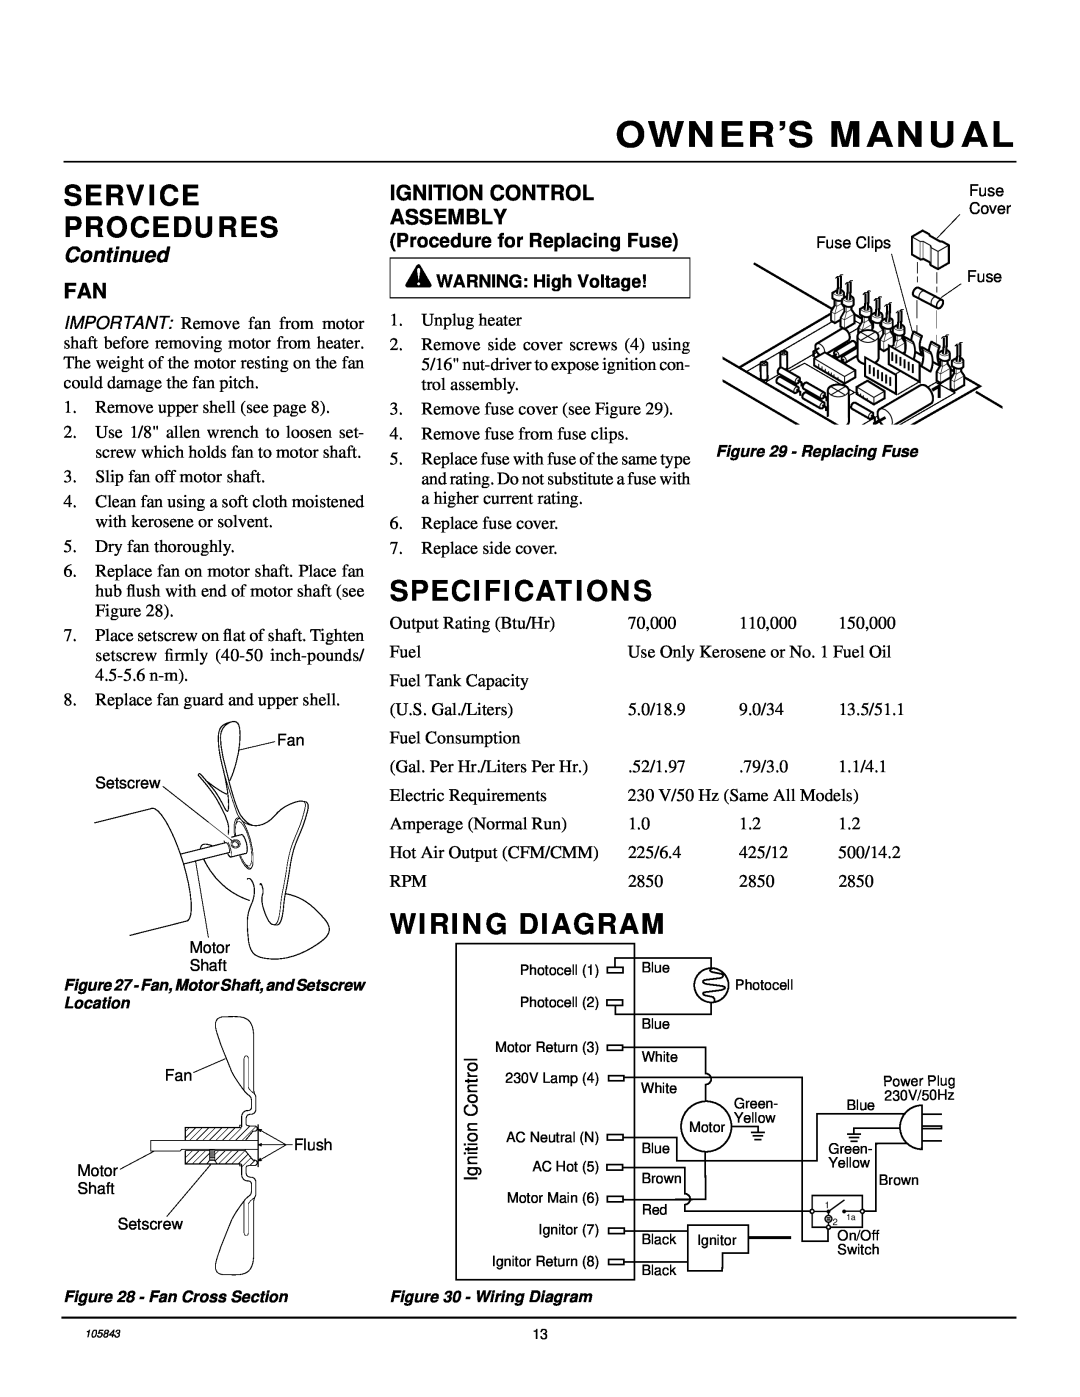 Desa D30H Specifications, Wiring Diagram, Ignition Control Assembly, Service Procedures, Continued, WARNING High Voltage 